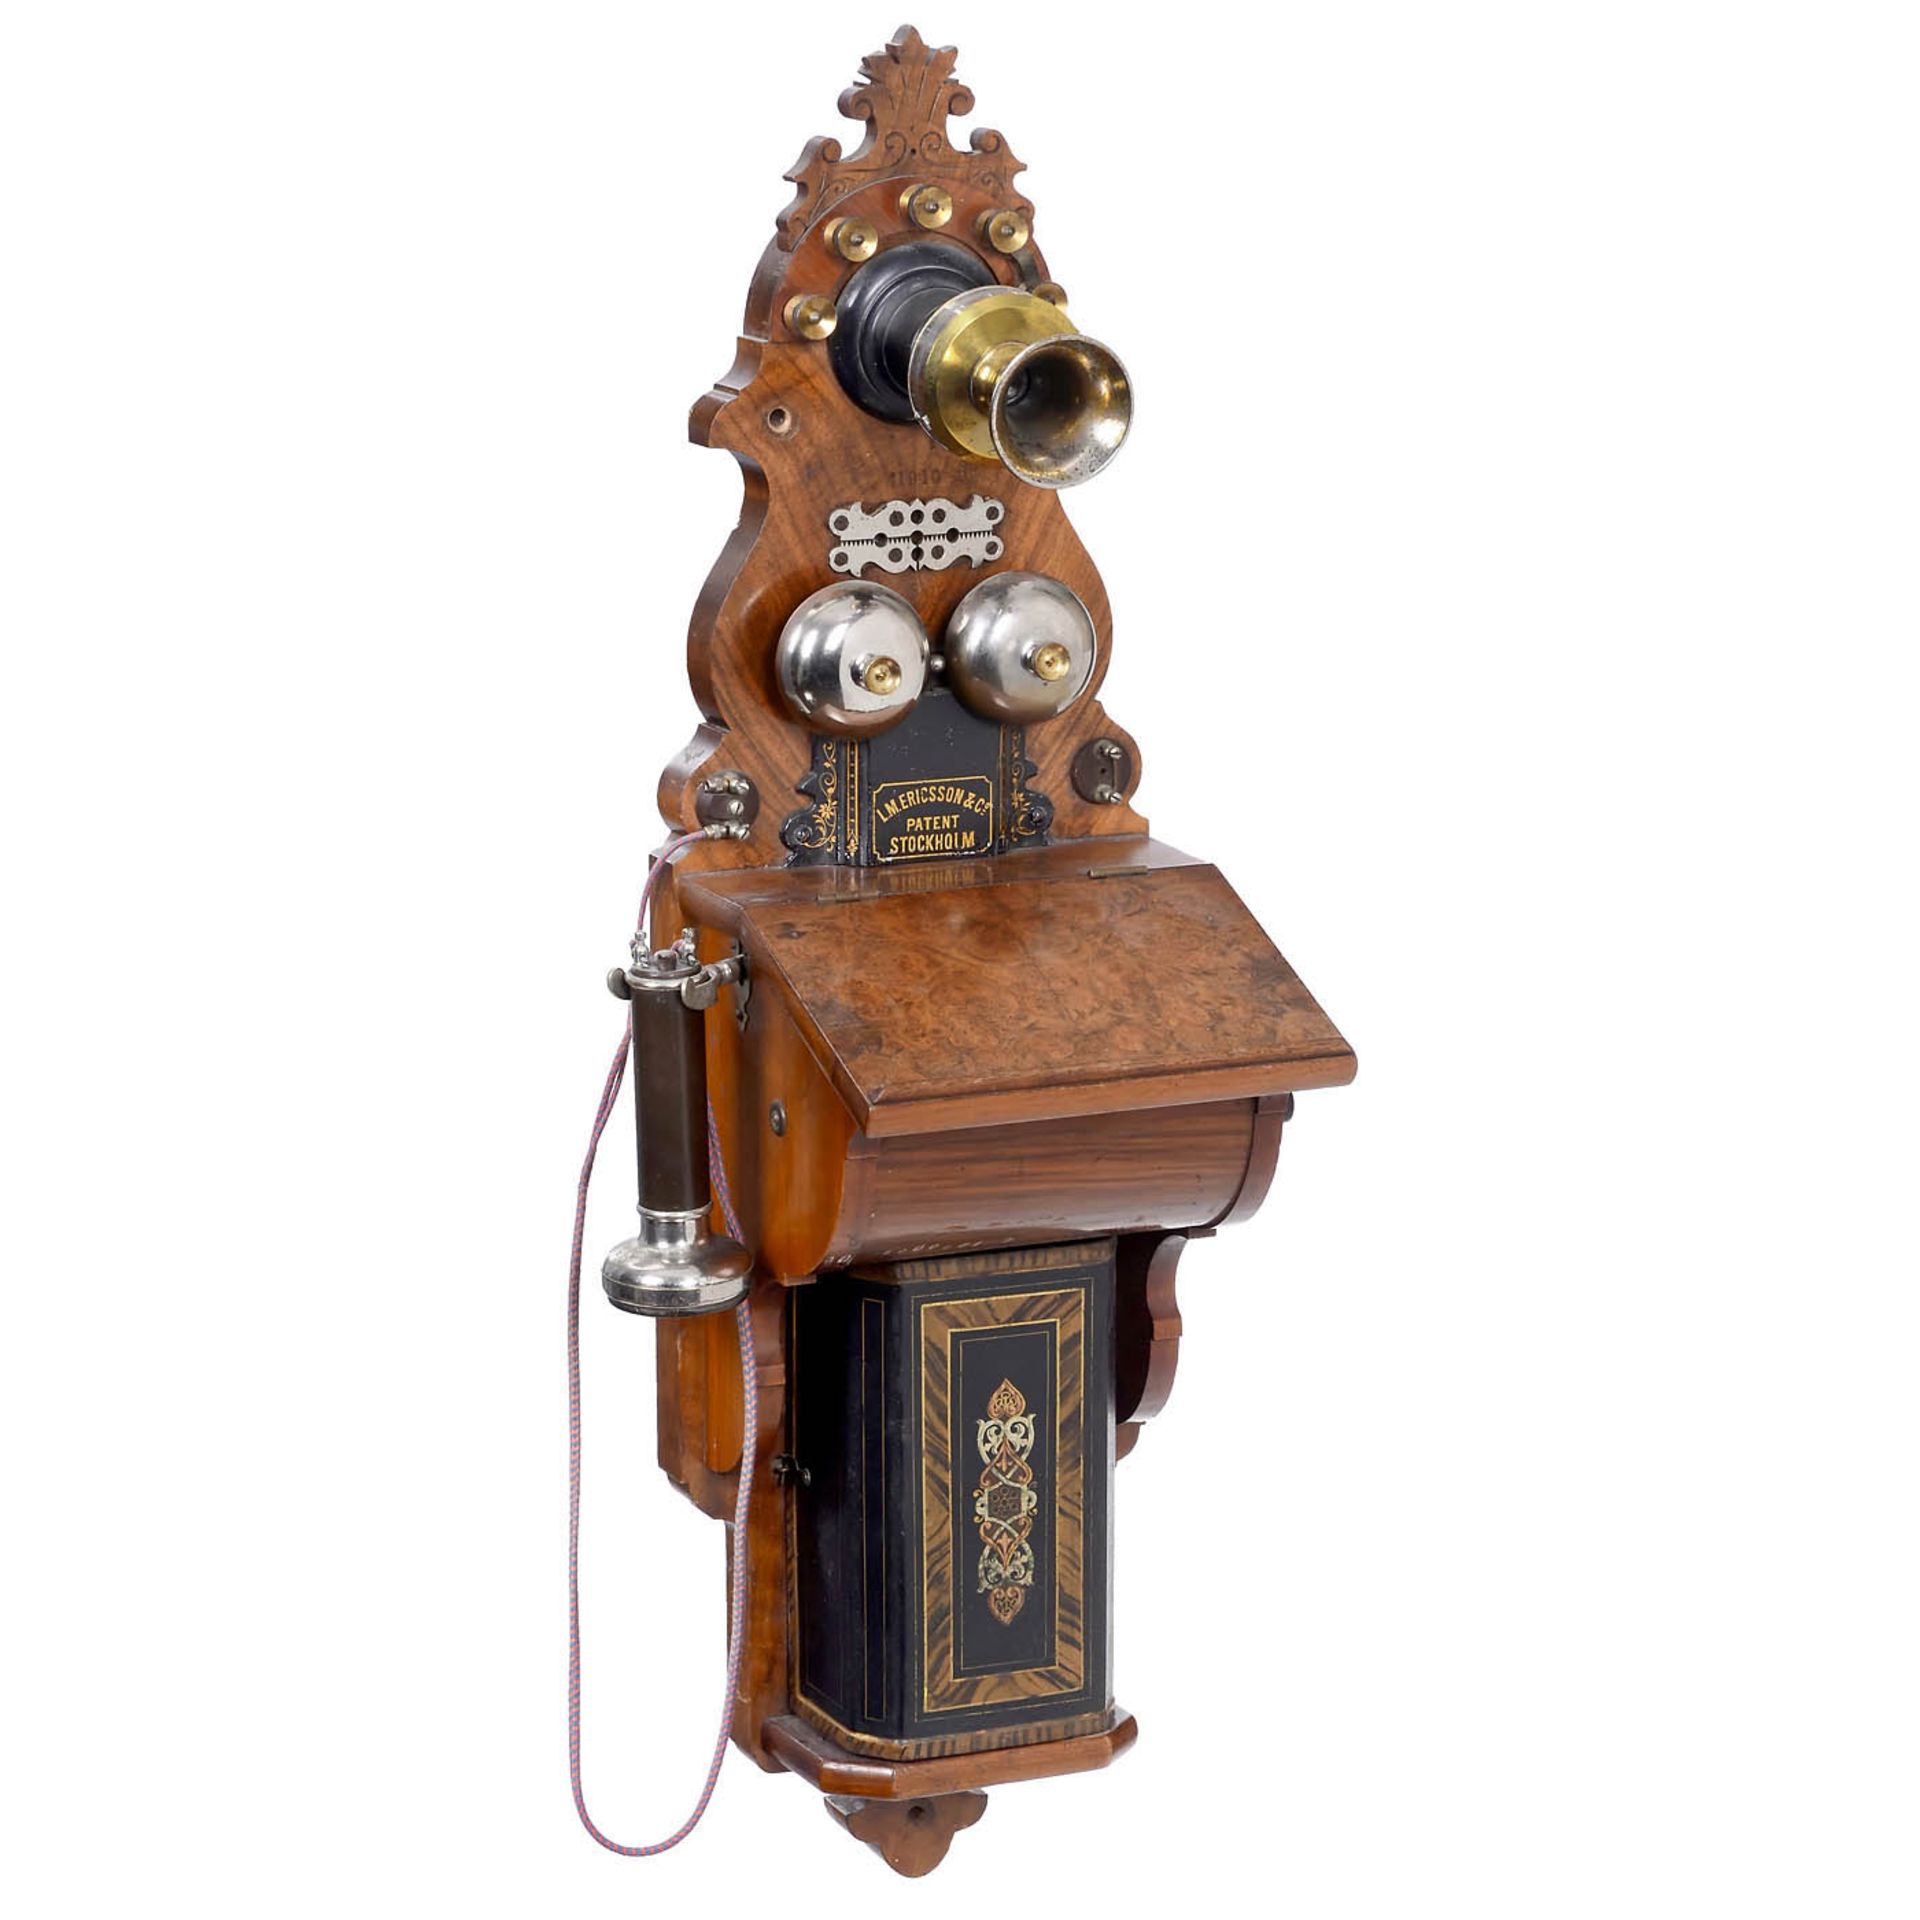 Early Wall Telephone by L.M. Ericsson, 1890 onwards - Bild 2 aus 2